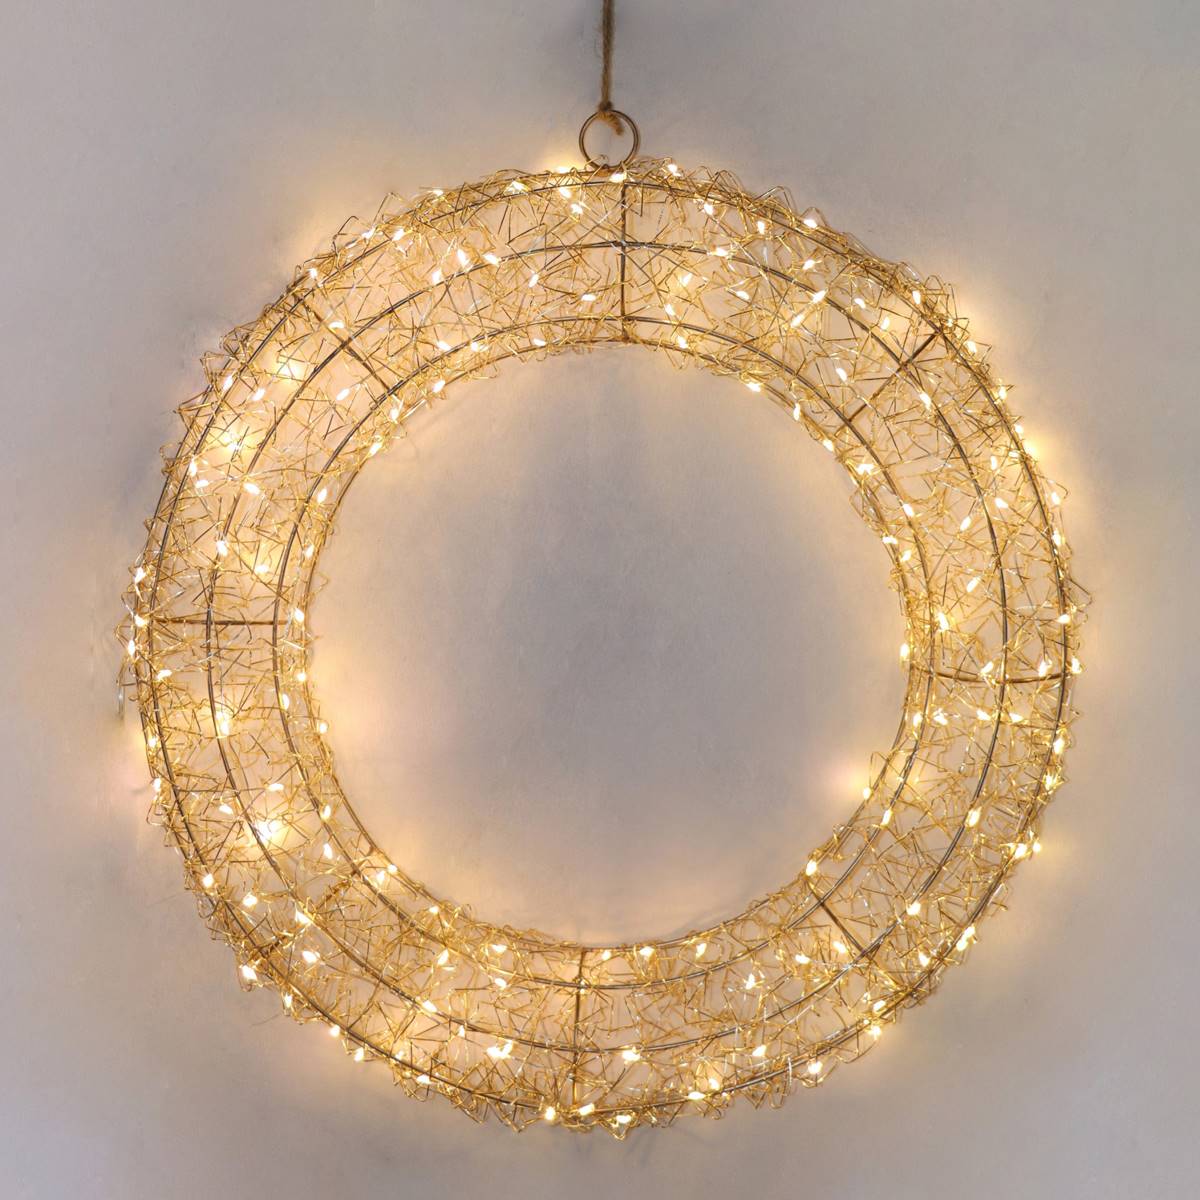 Northlight Seasonal 18in. LED Gold Wire Wreath